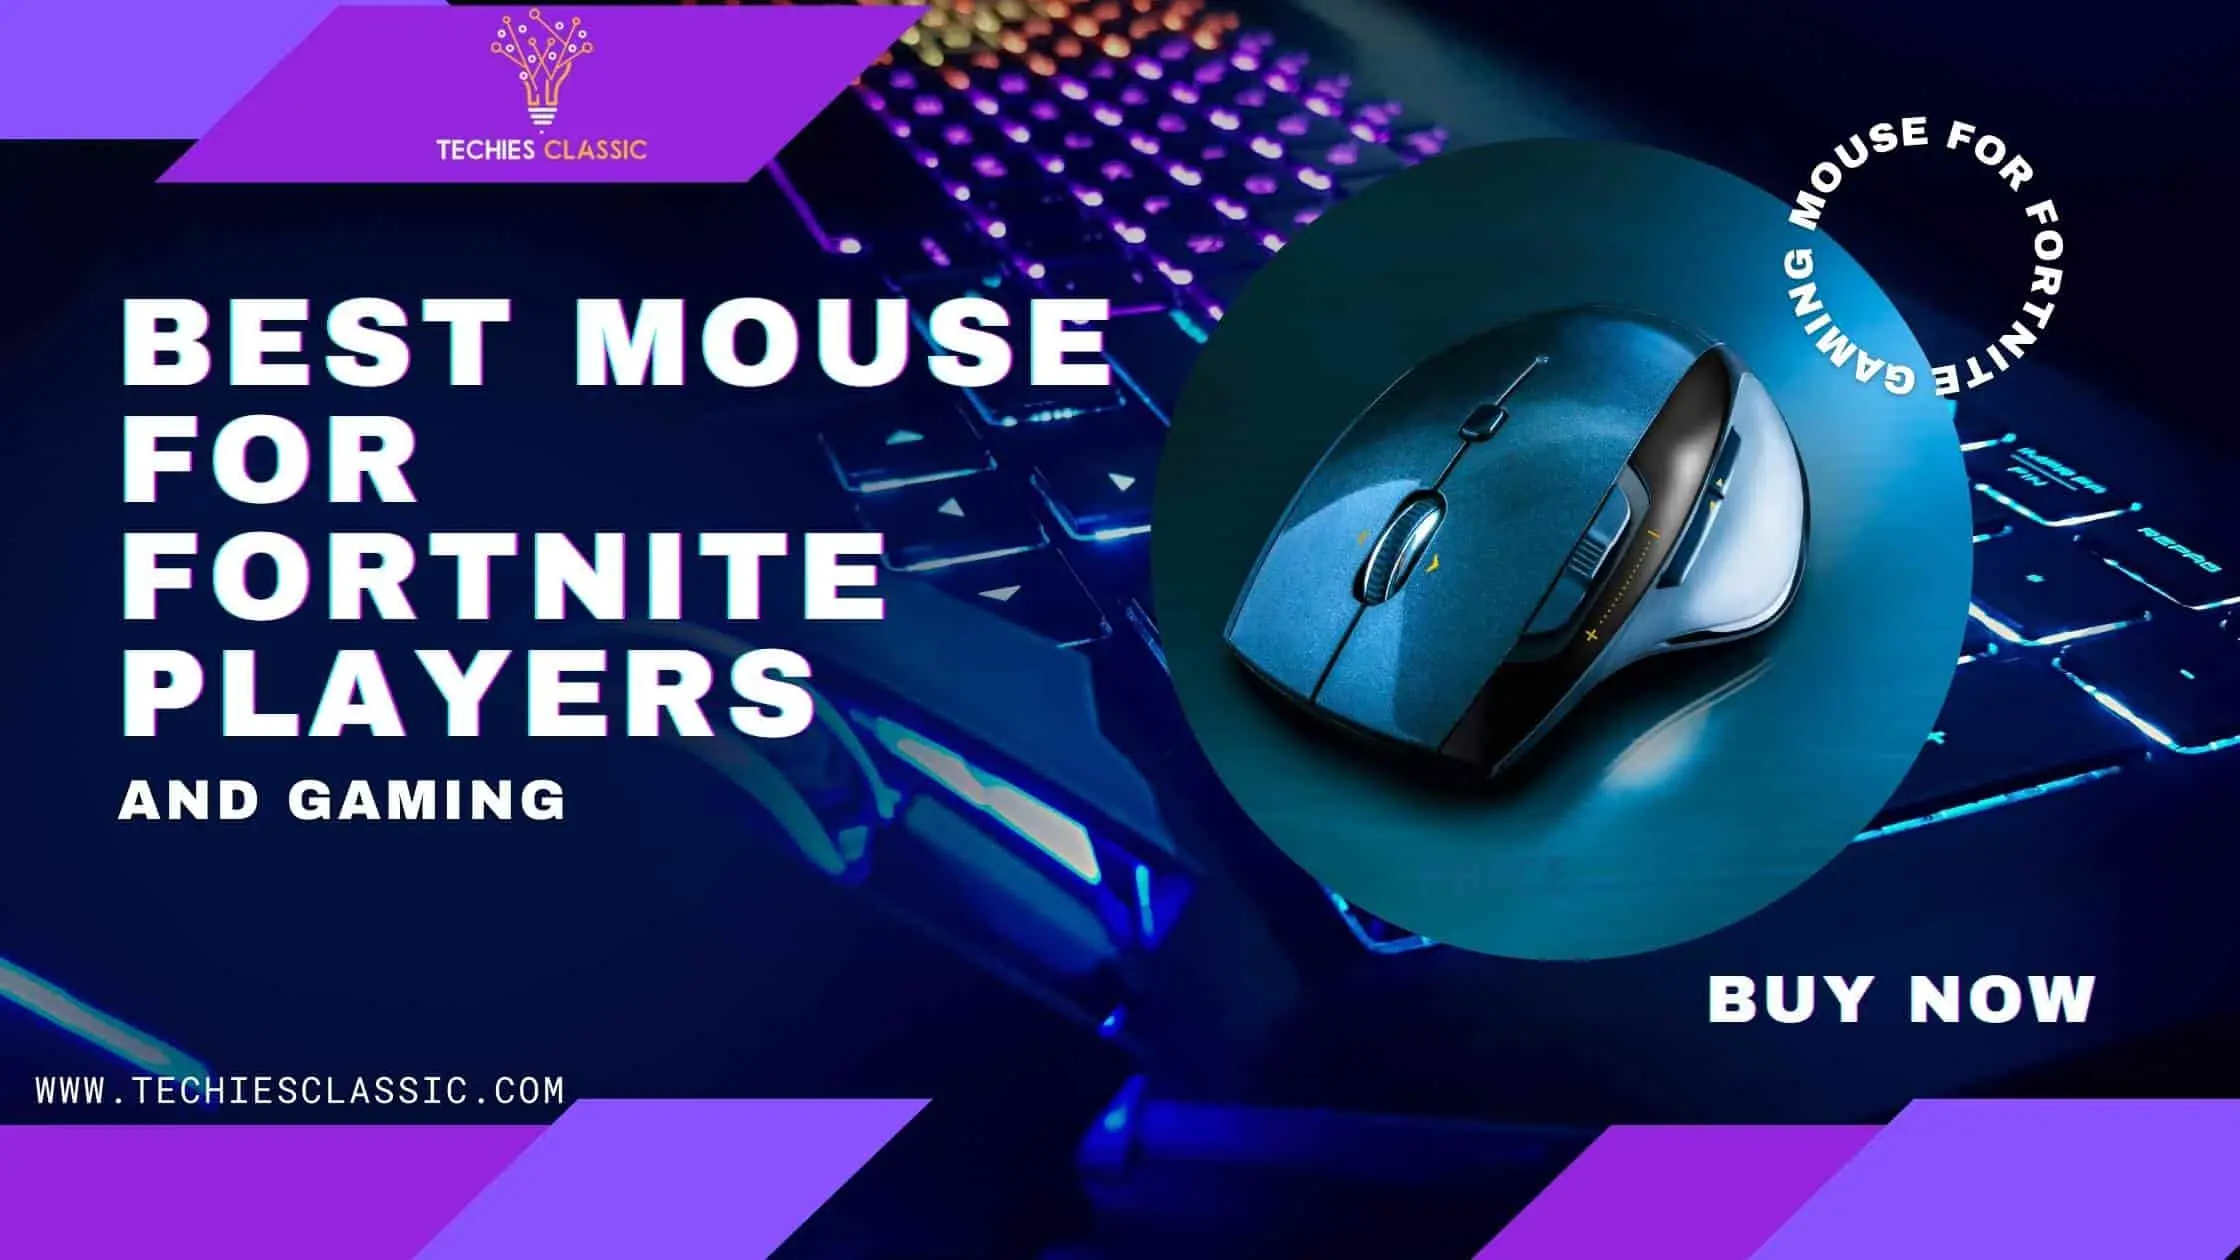 The Best Mouse For Fortnite Players And Gaming in 2022 